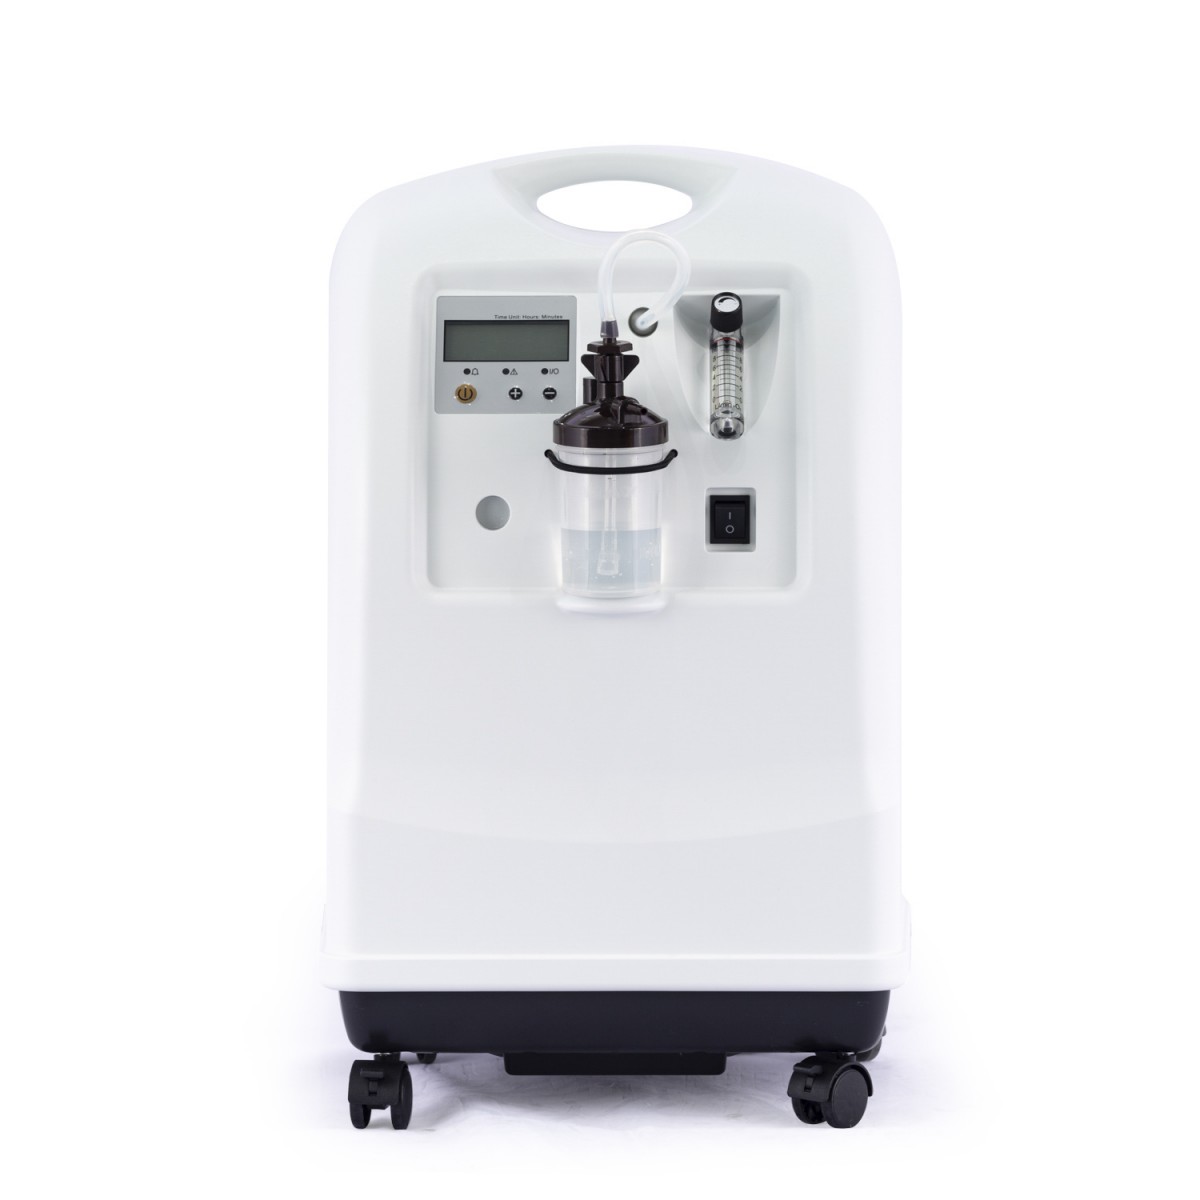 Ksoc-10-Professional-Oxygen-Concentrator-Oxygen-Generator-with-CE-Certificate-for-Physical-Therapy